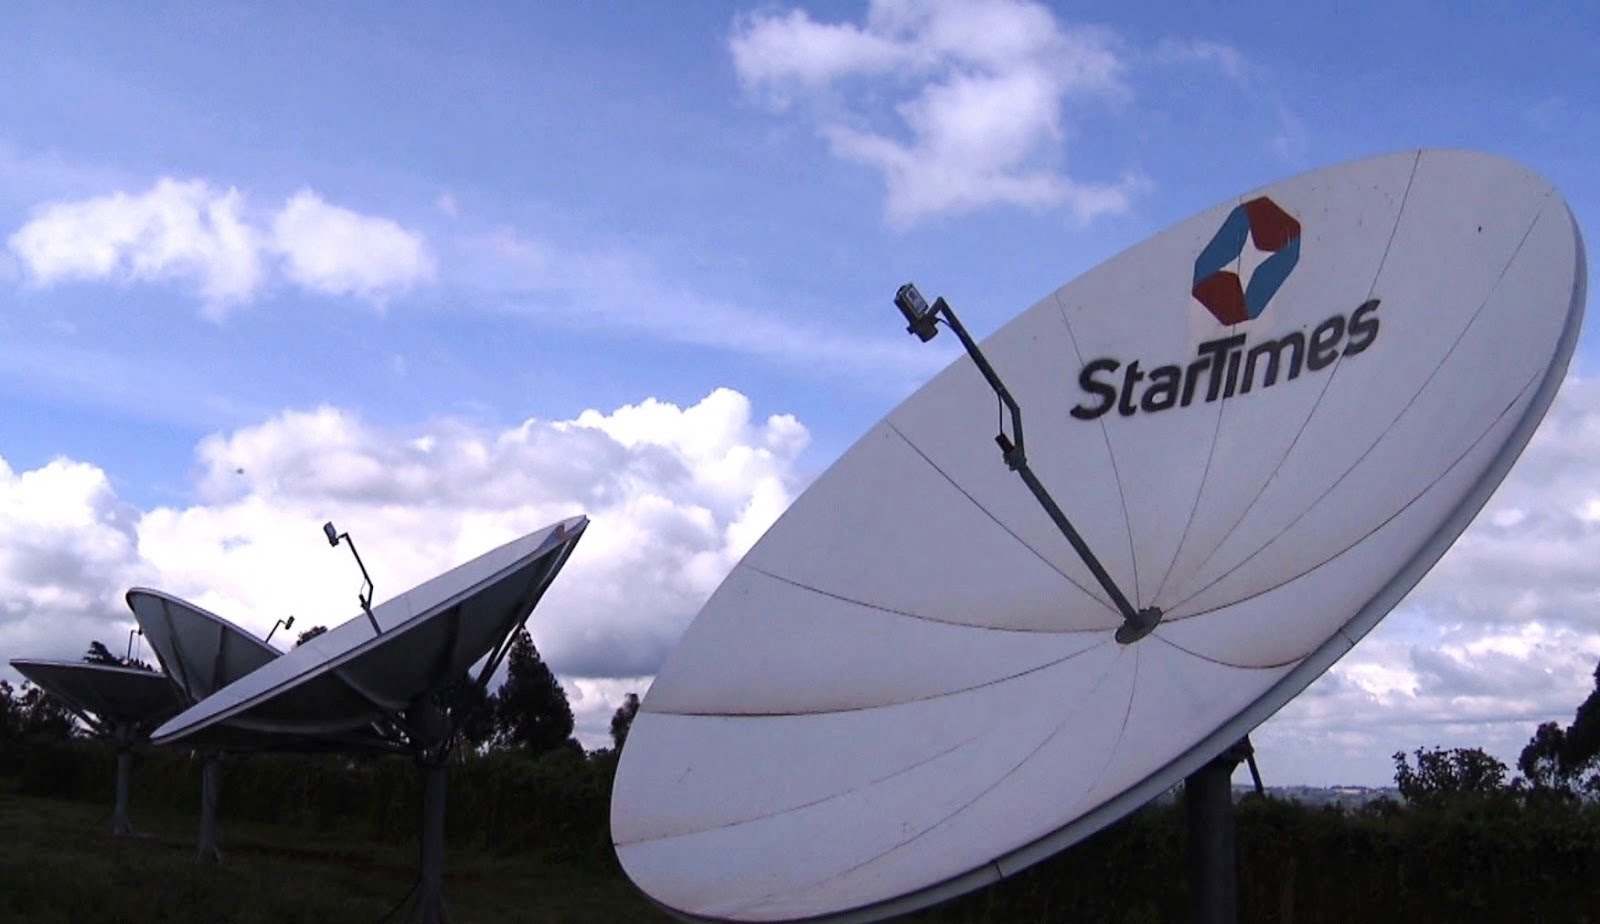 How do you pay for the StarTimes package via Mpesa?